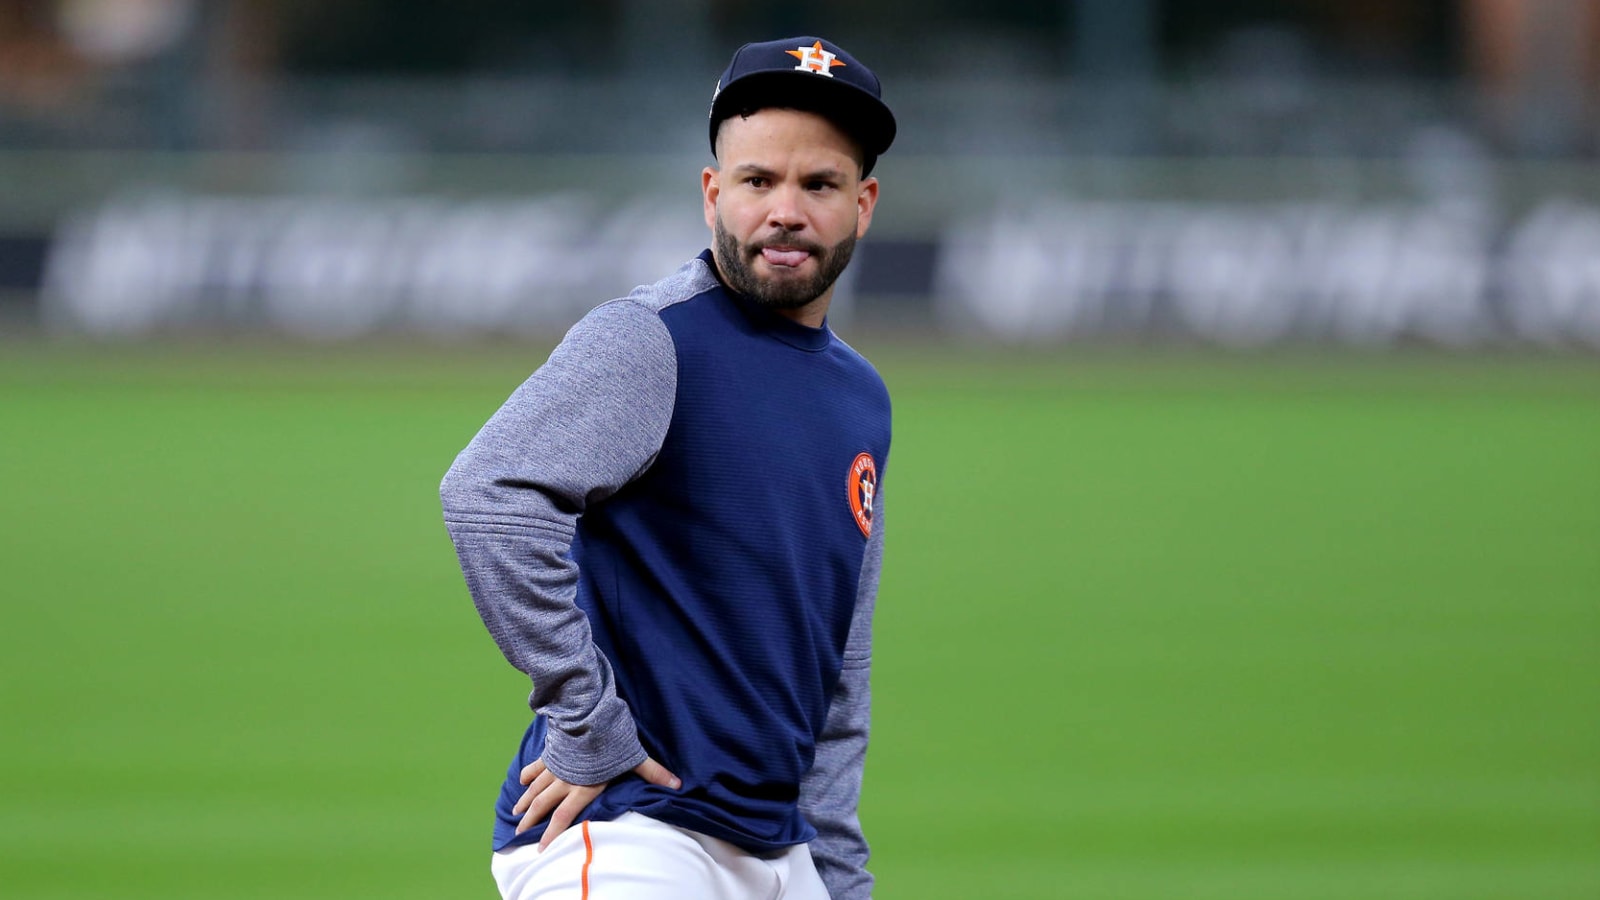 Ken Rosenthal shares thoughts on Jose Altuve interview that fueled buzzer rumors